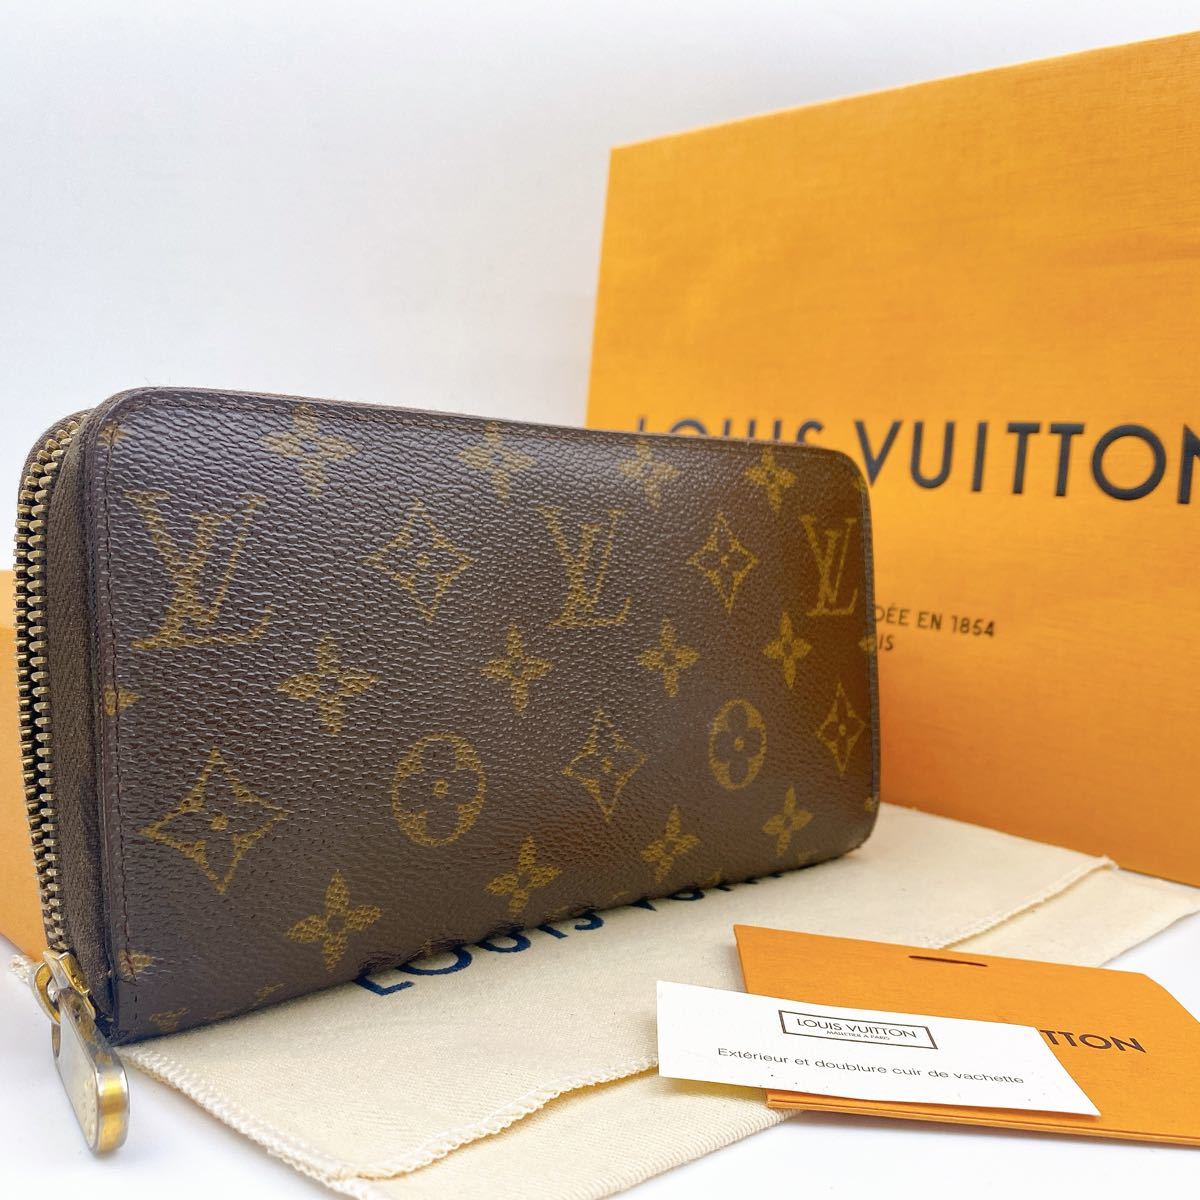 A843【正規品】LOUIS VUITTON ルイヴィトン モノグラム ジッピー